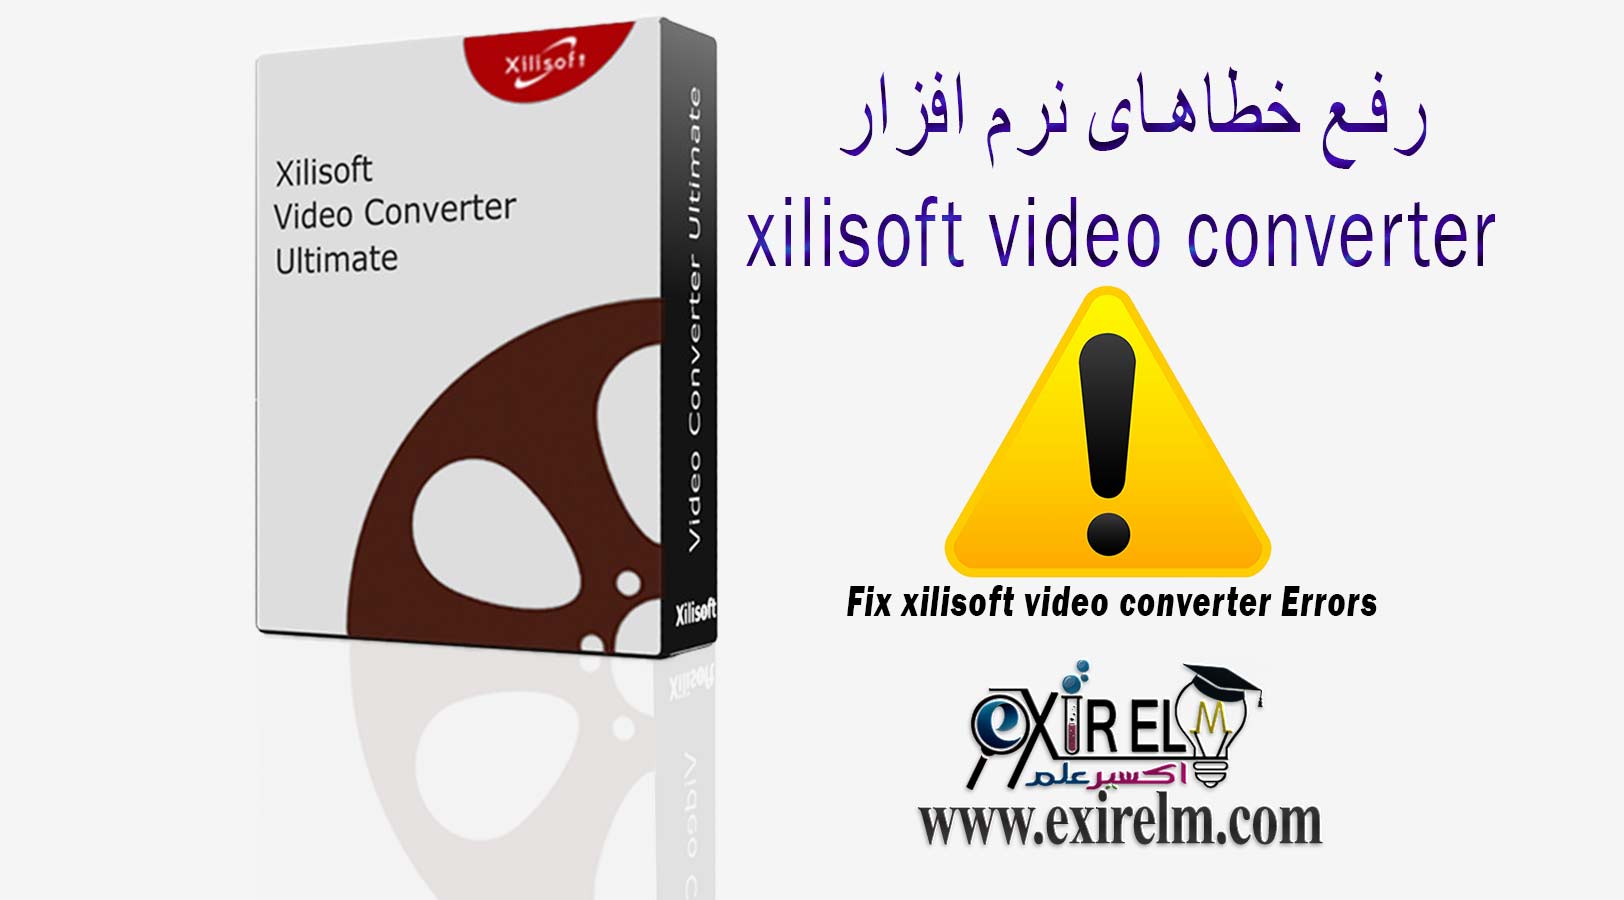 Xilisoft YouTube Video Converter 5.7.7.20230822 instal the last version for ios